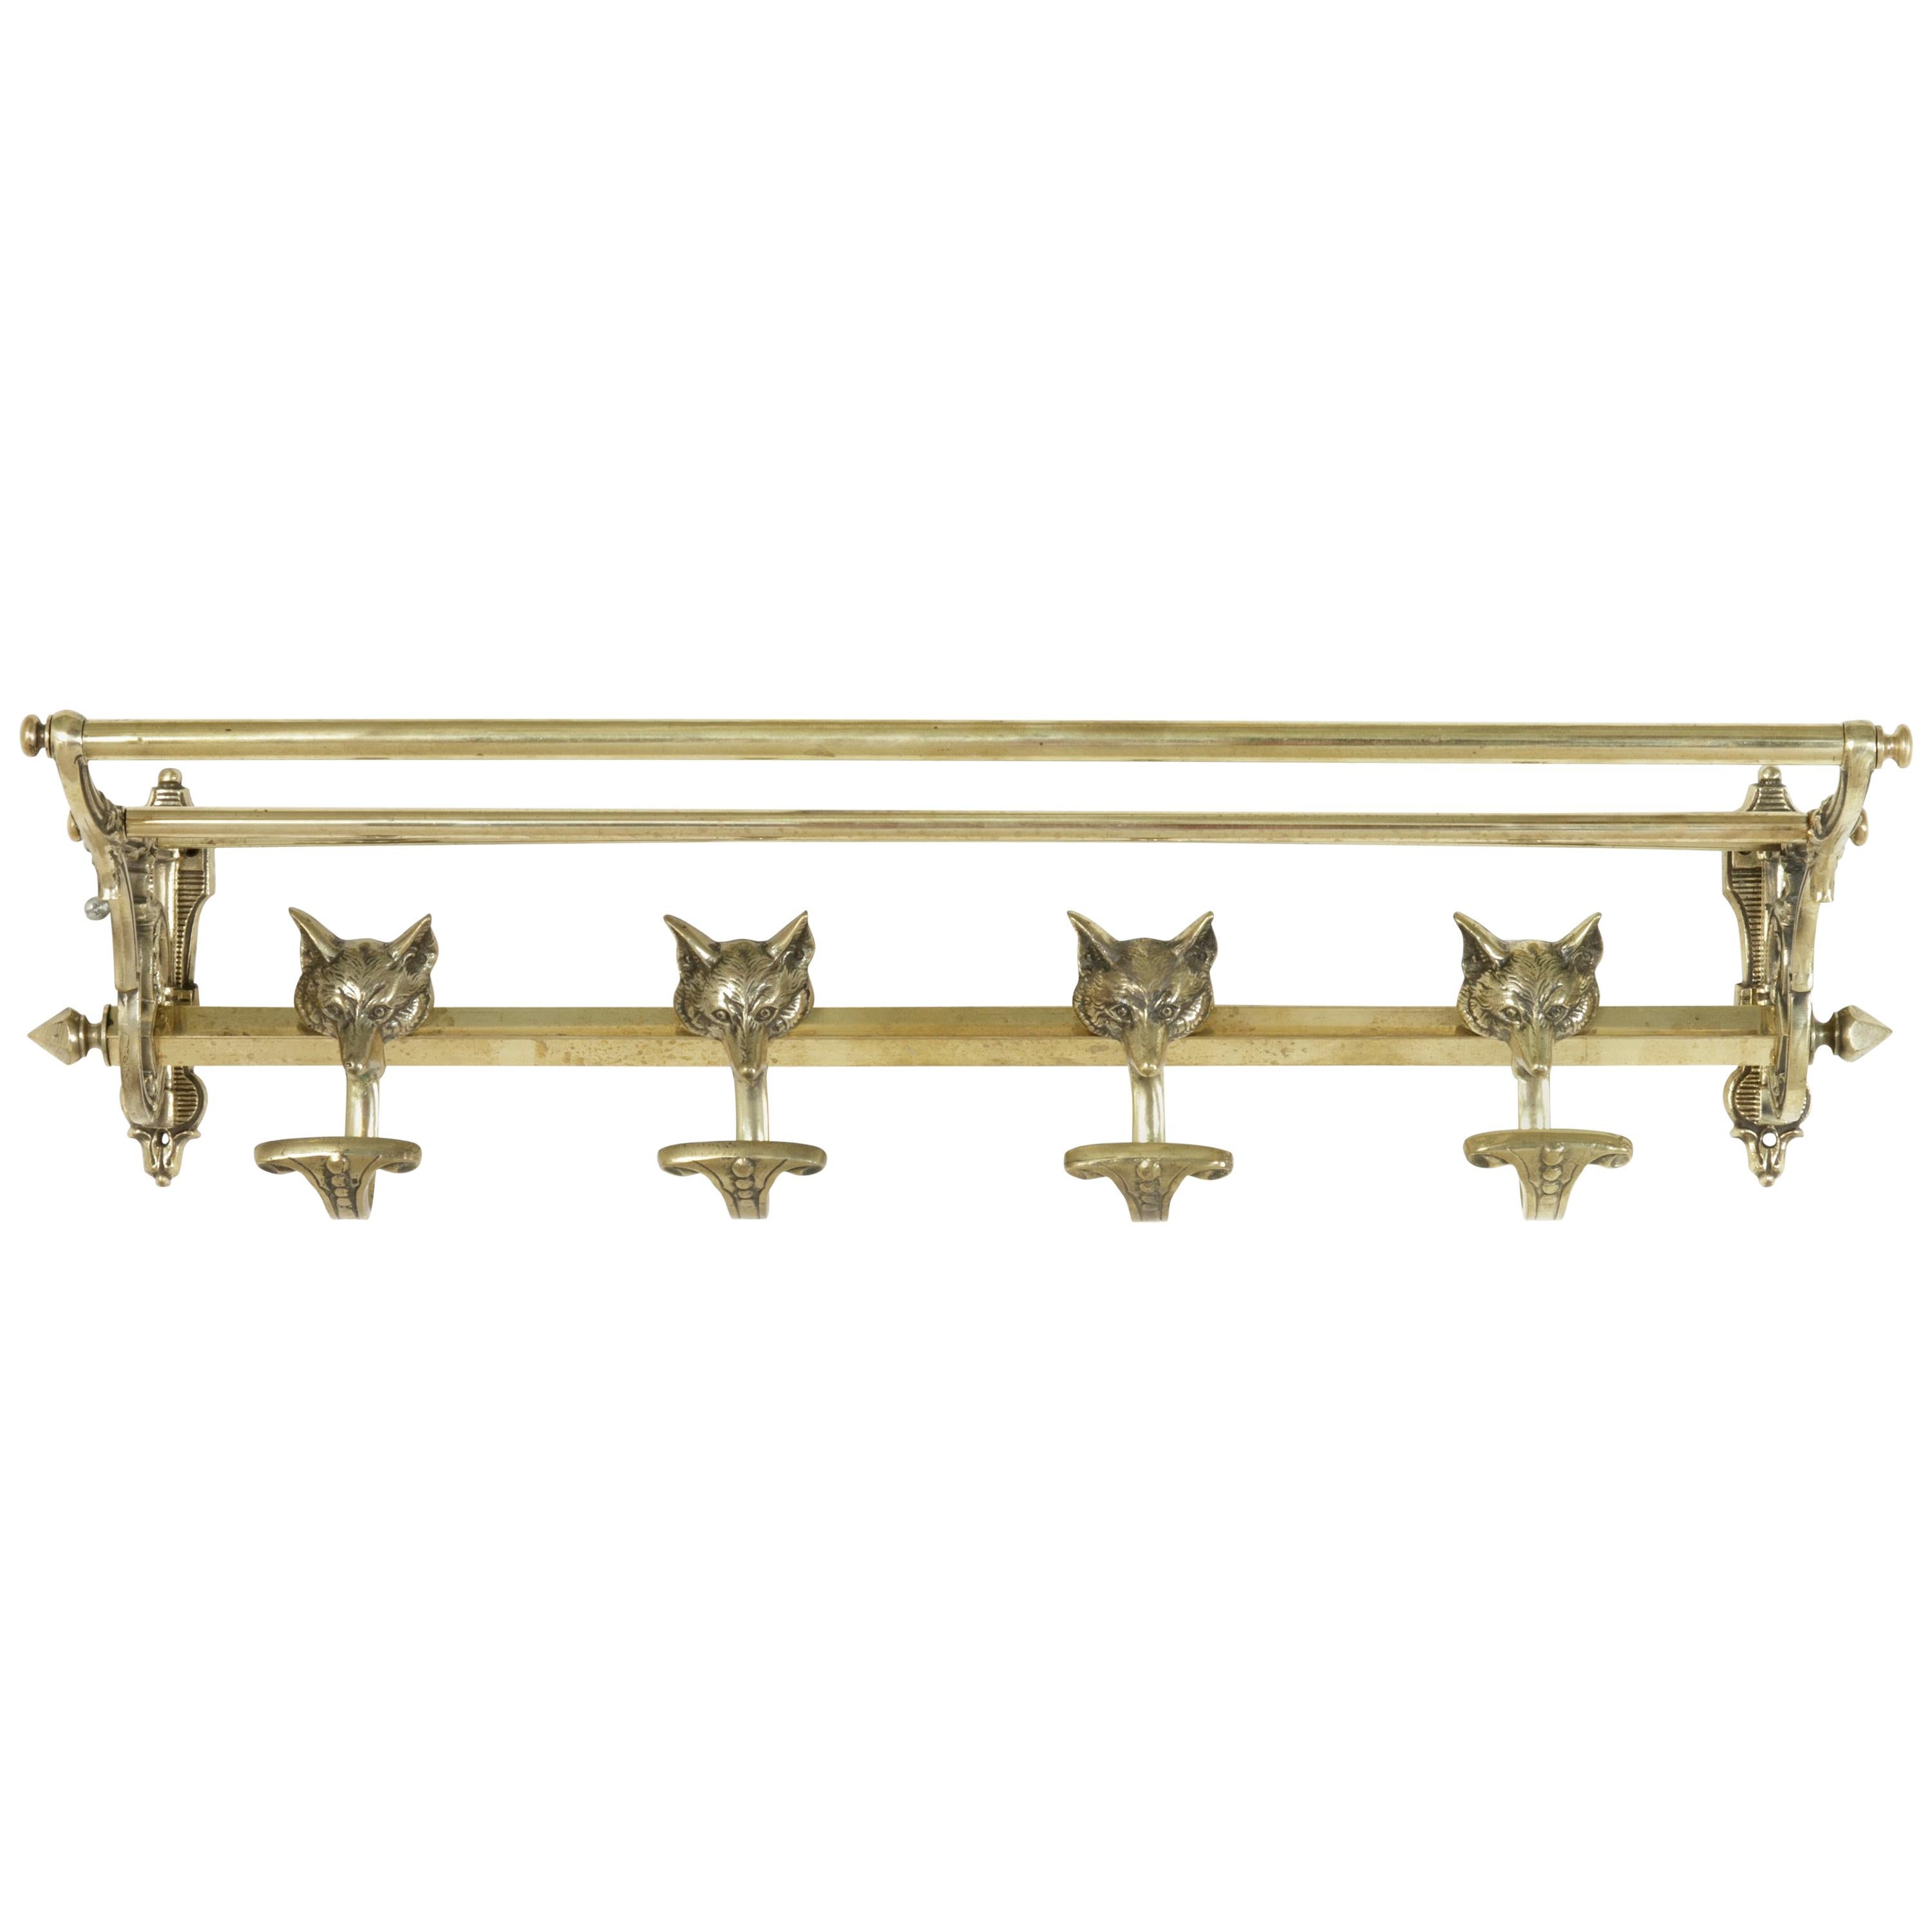 French Artisan-Made Brass Hat and Coat Rack with Four Hooks Featuring Fox Heads